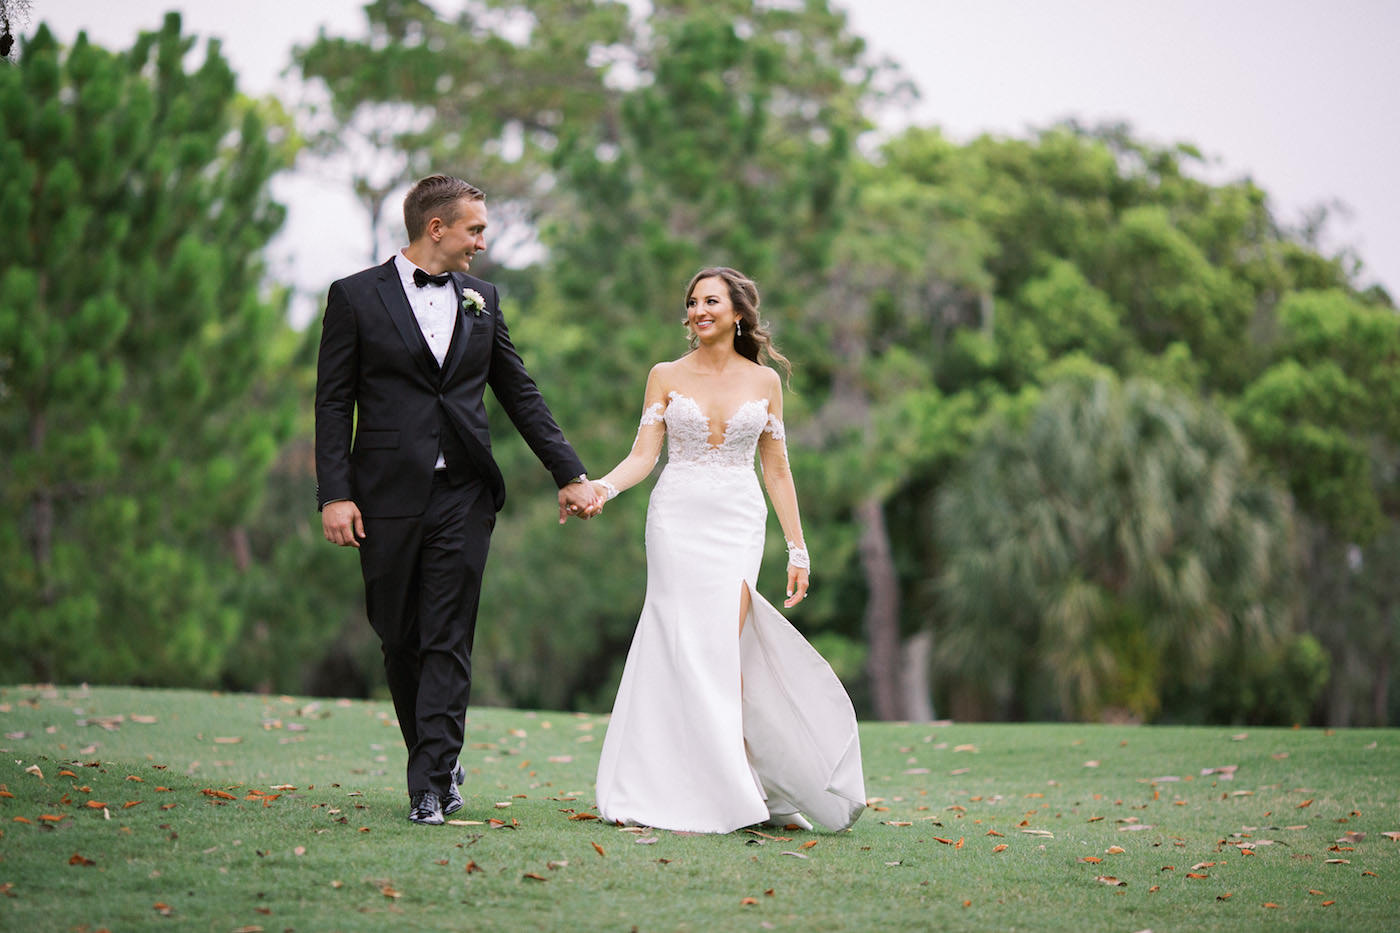 Ines di Santo Designer Bridal Gown Illusion Lace Sexy Wedding Dress | Outdoor Bride and Groom Portraits at Tampa Golf Course Putting Green | Groom in Classic Black Tux Suit with Bow Tie | Isabel O'Neil Bridal Collection